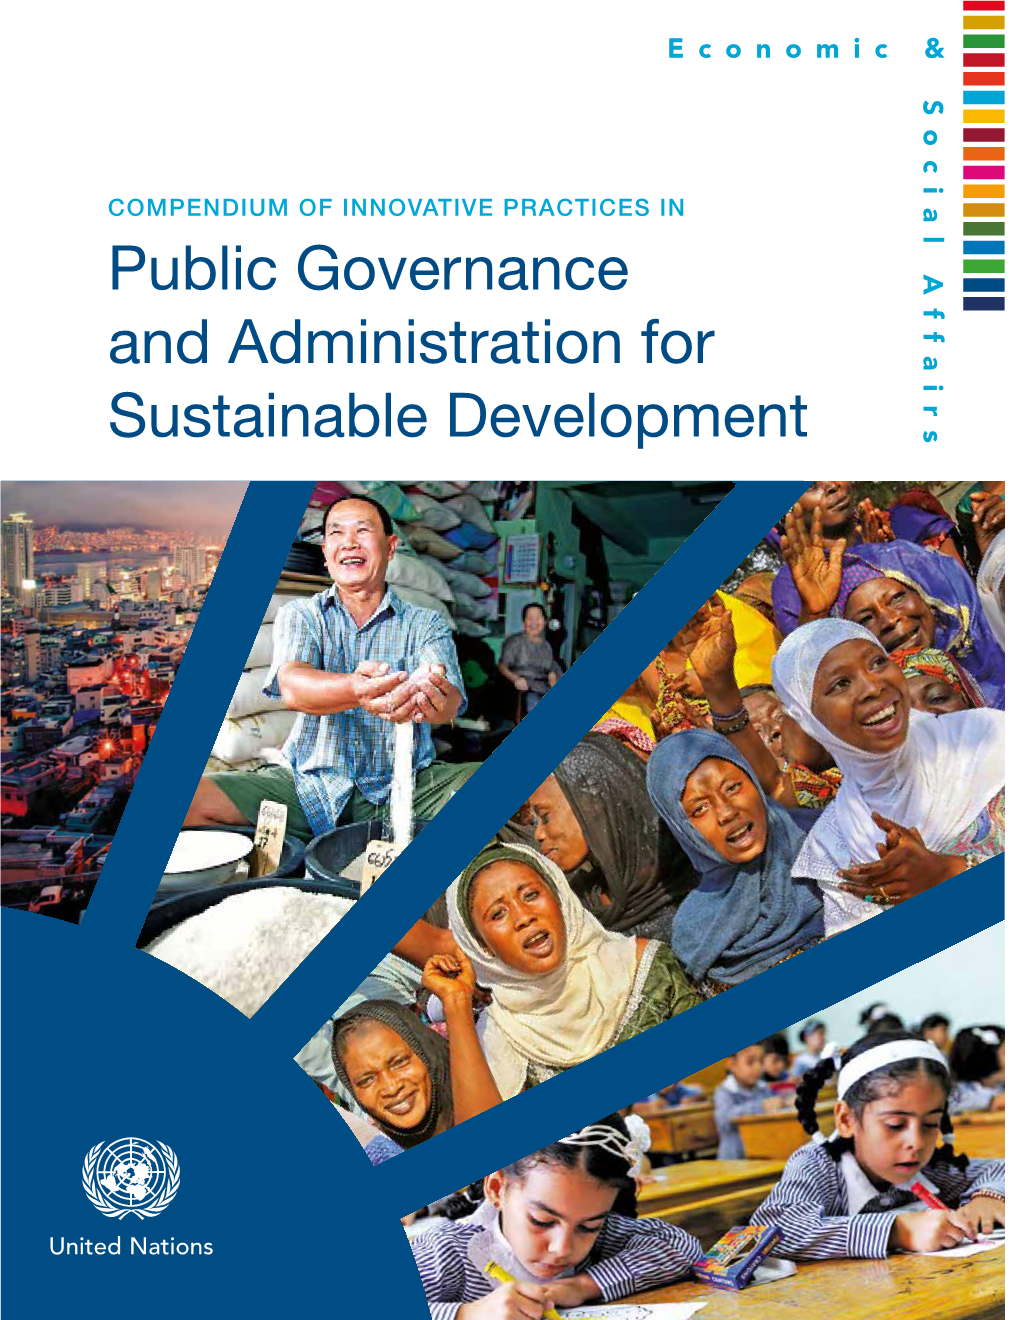 Public Governance and Administration for Sustainable Development